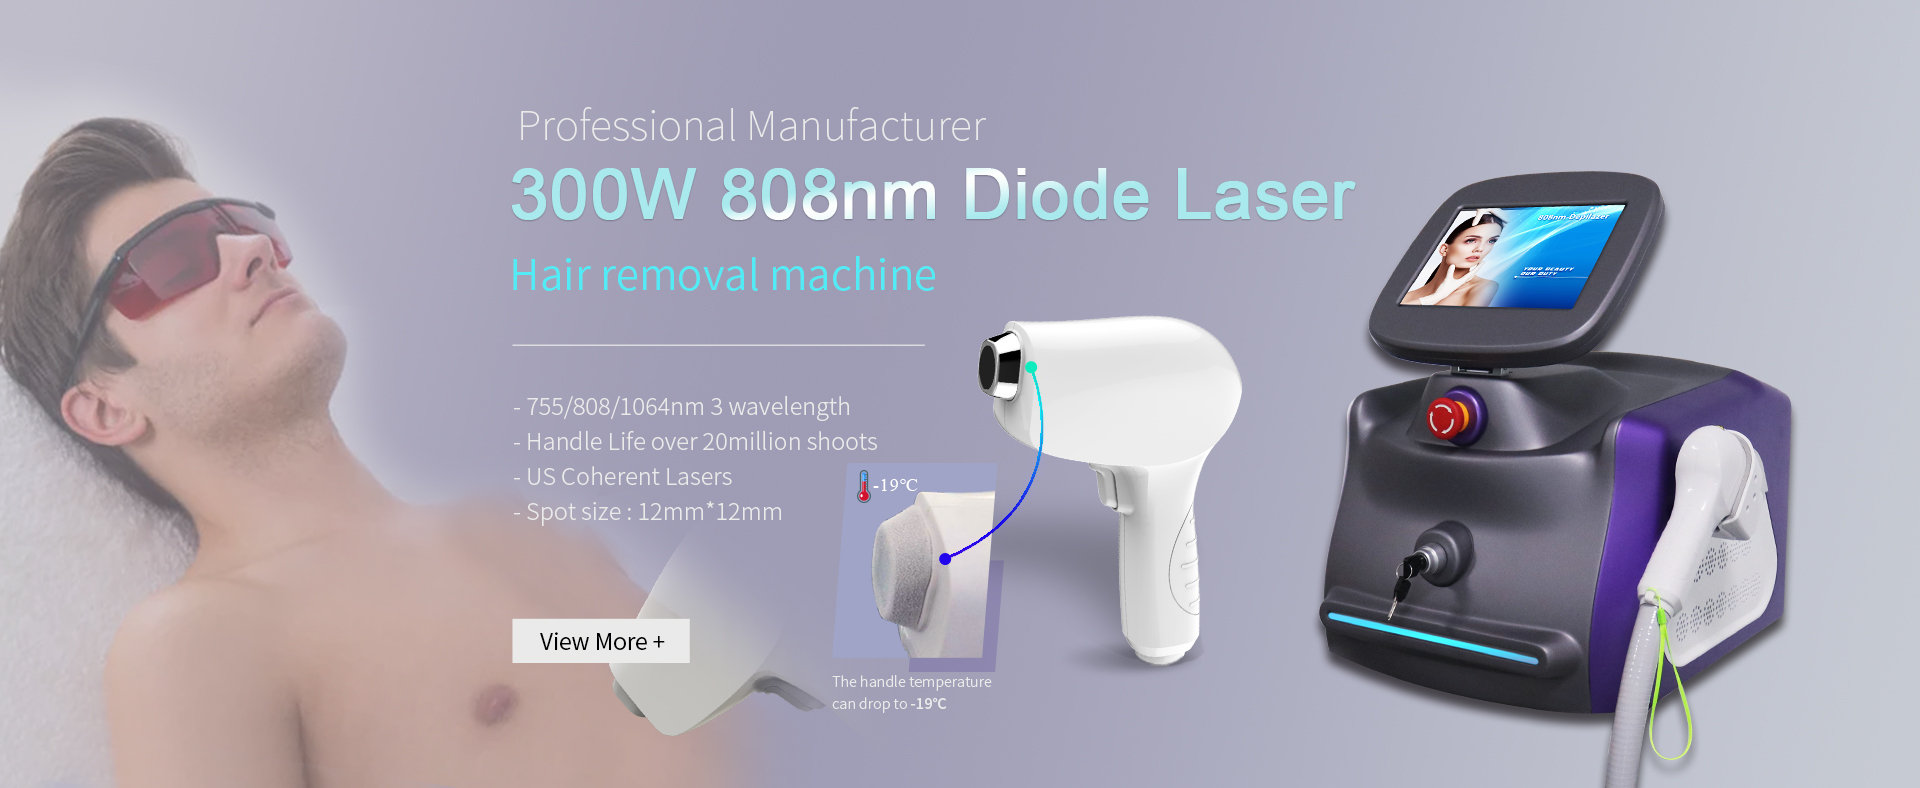 Portable diode laser hair removal|laser hair removal mahcine